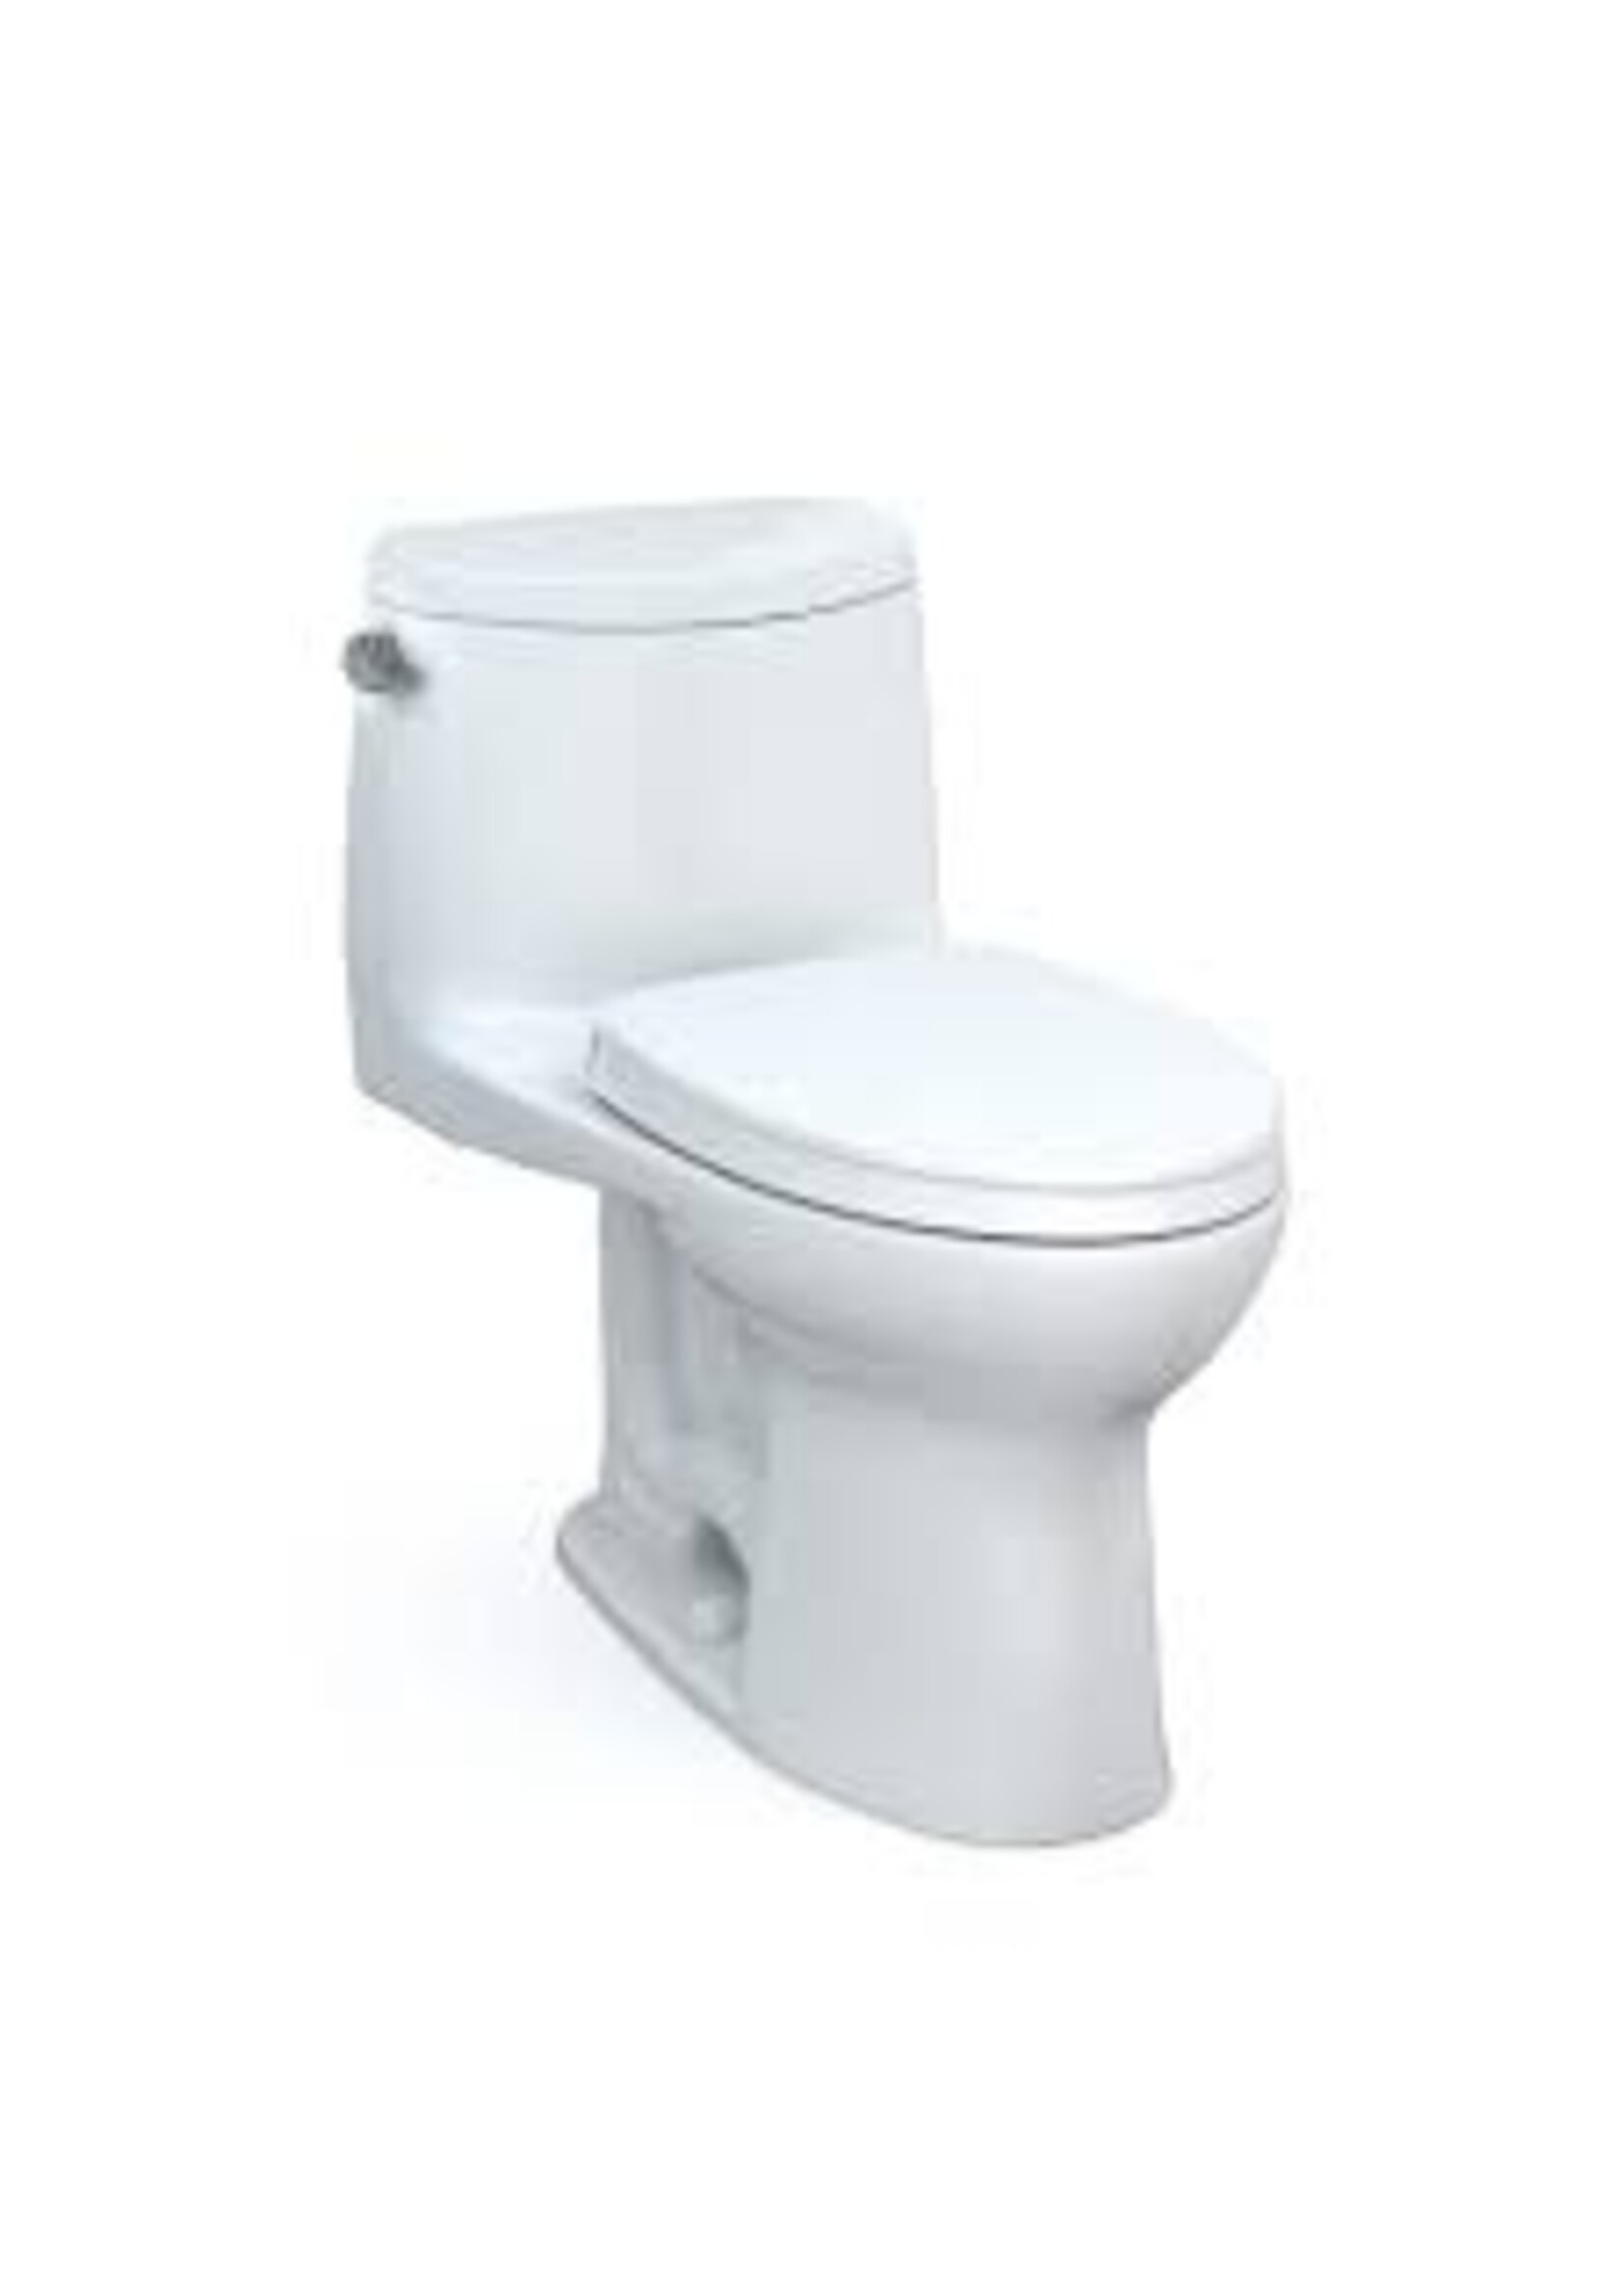 Toto Toto Ultramax II One-Piece Toilet - Colonial White